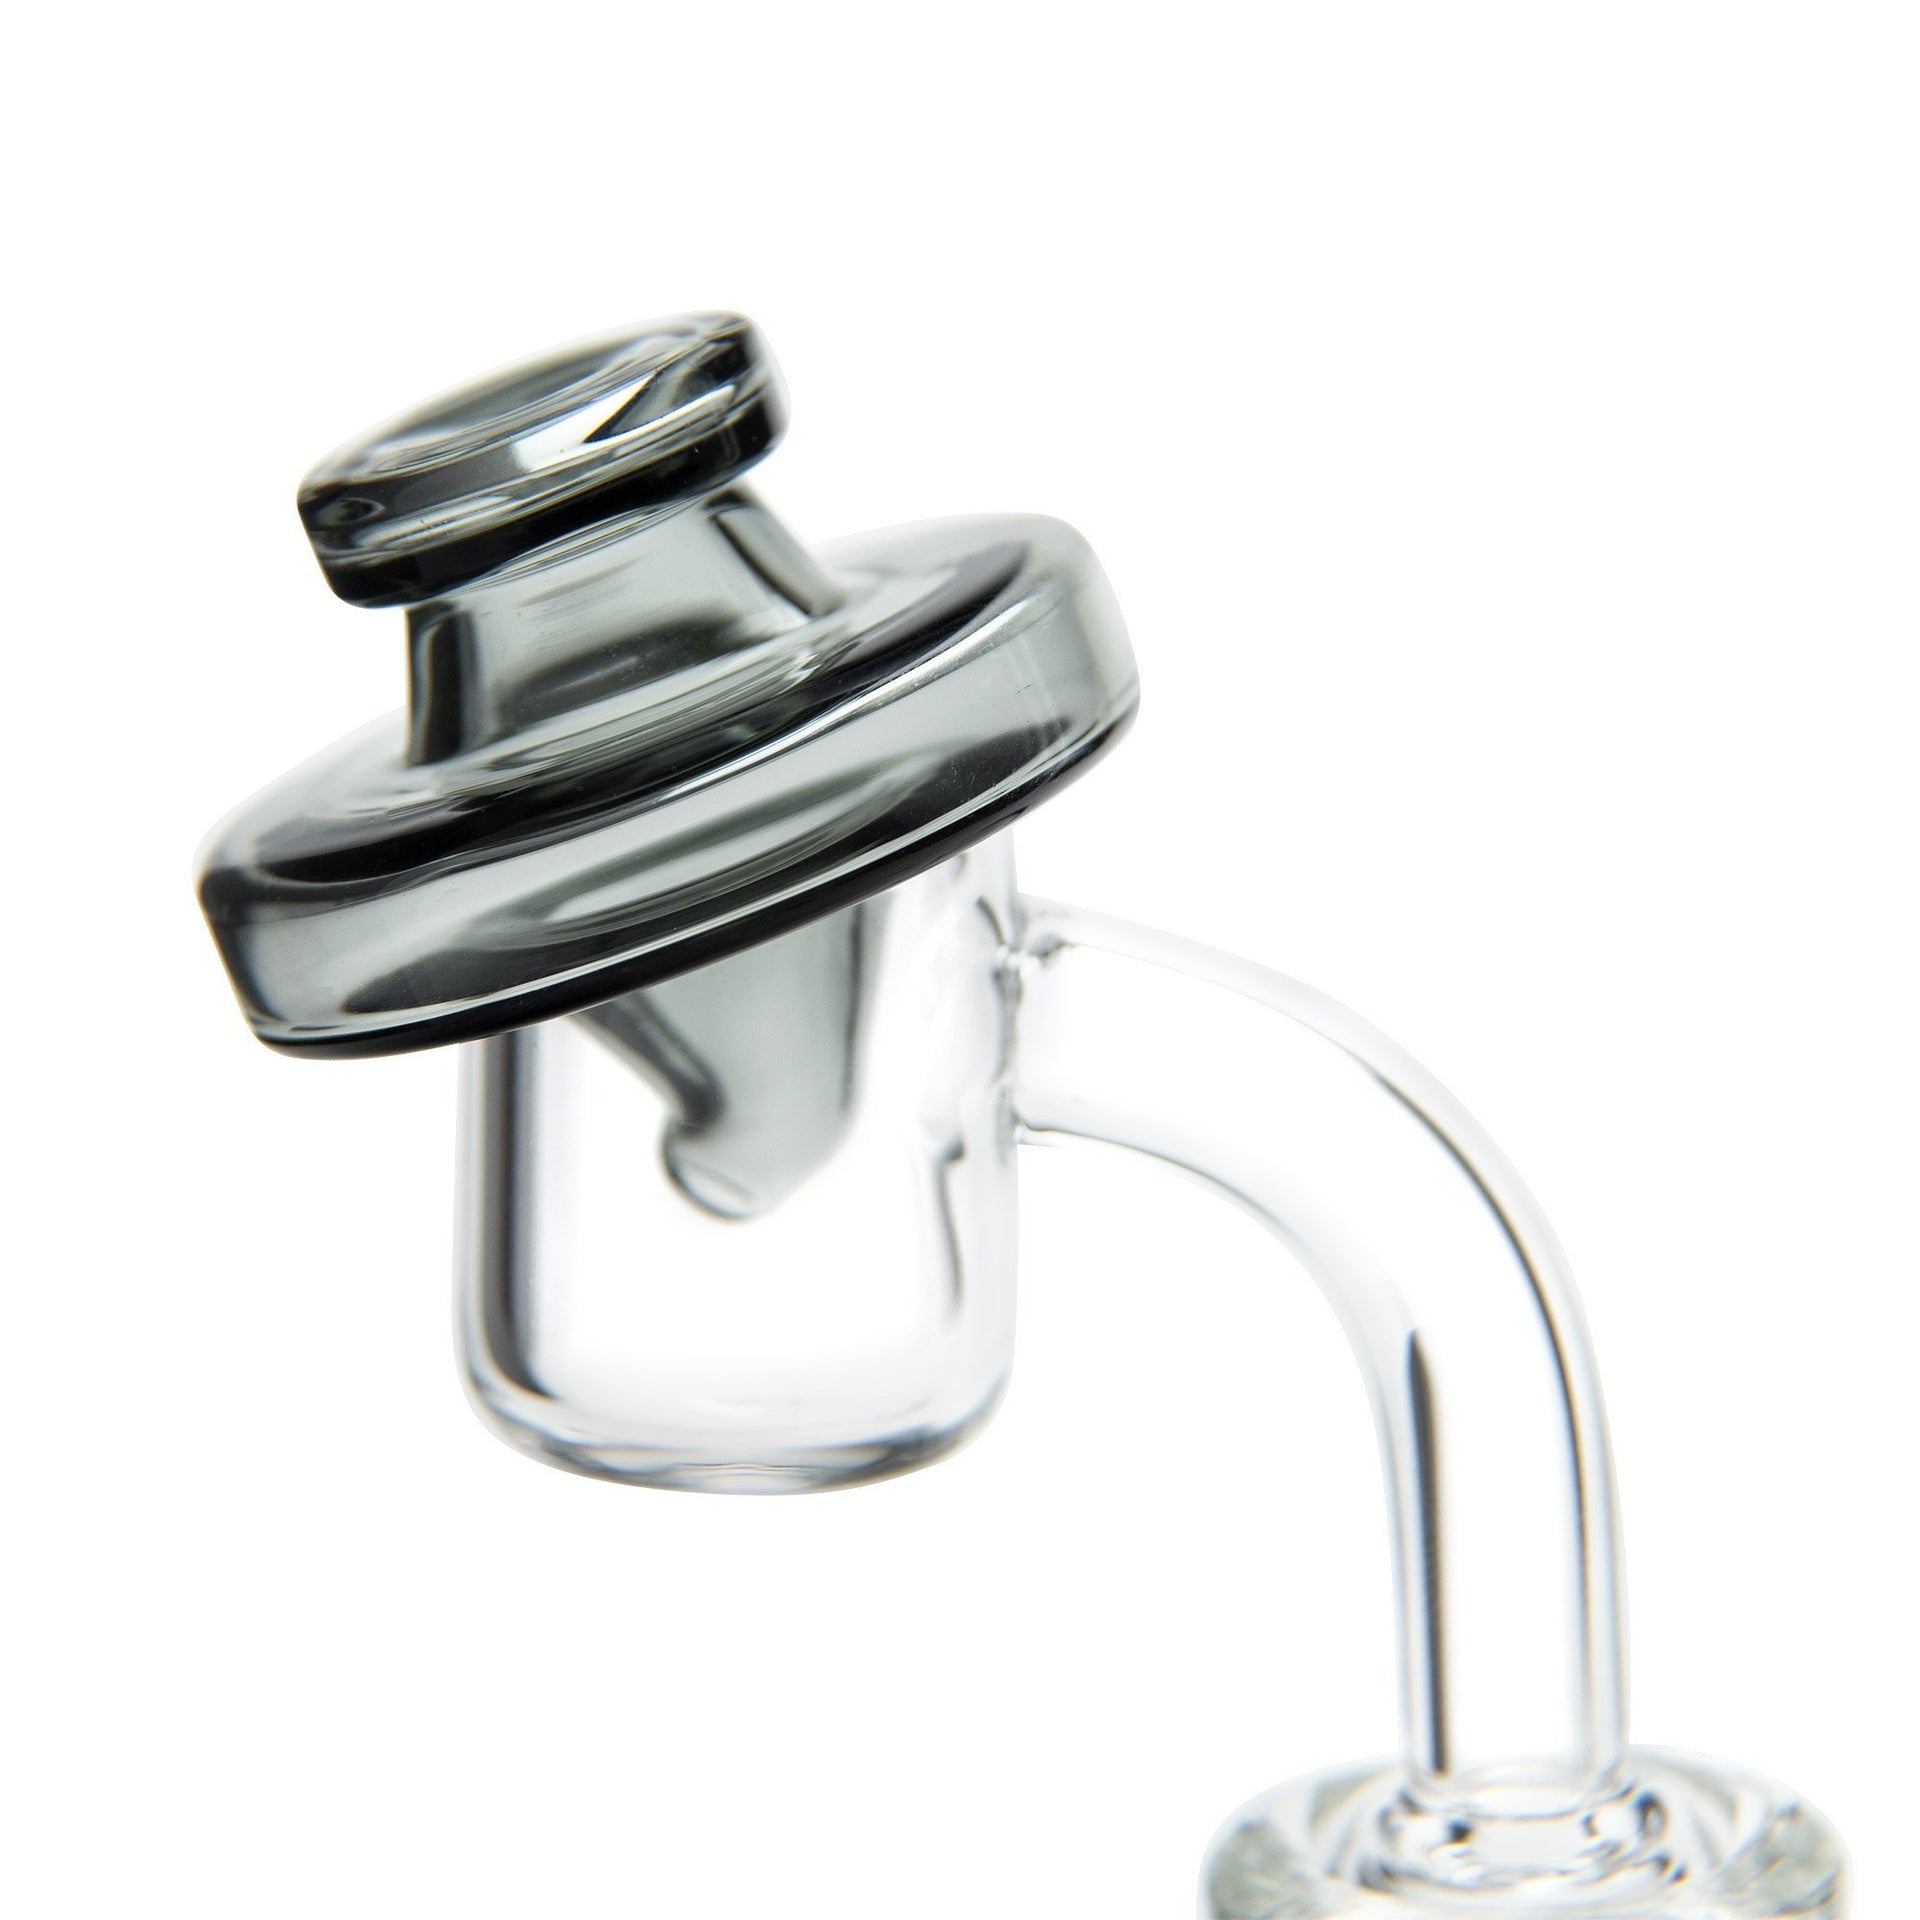 Airflow Carb Cap - Gray - 420 Science - The most trusted online smoke shop.